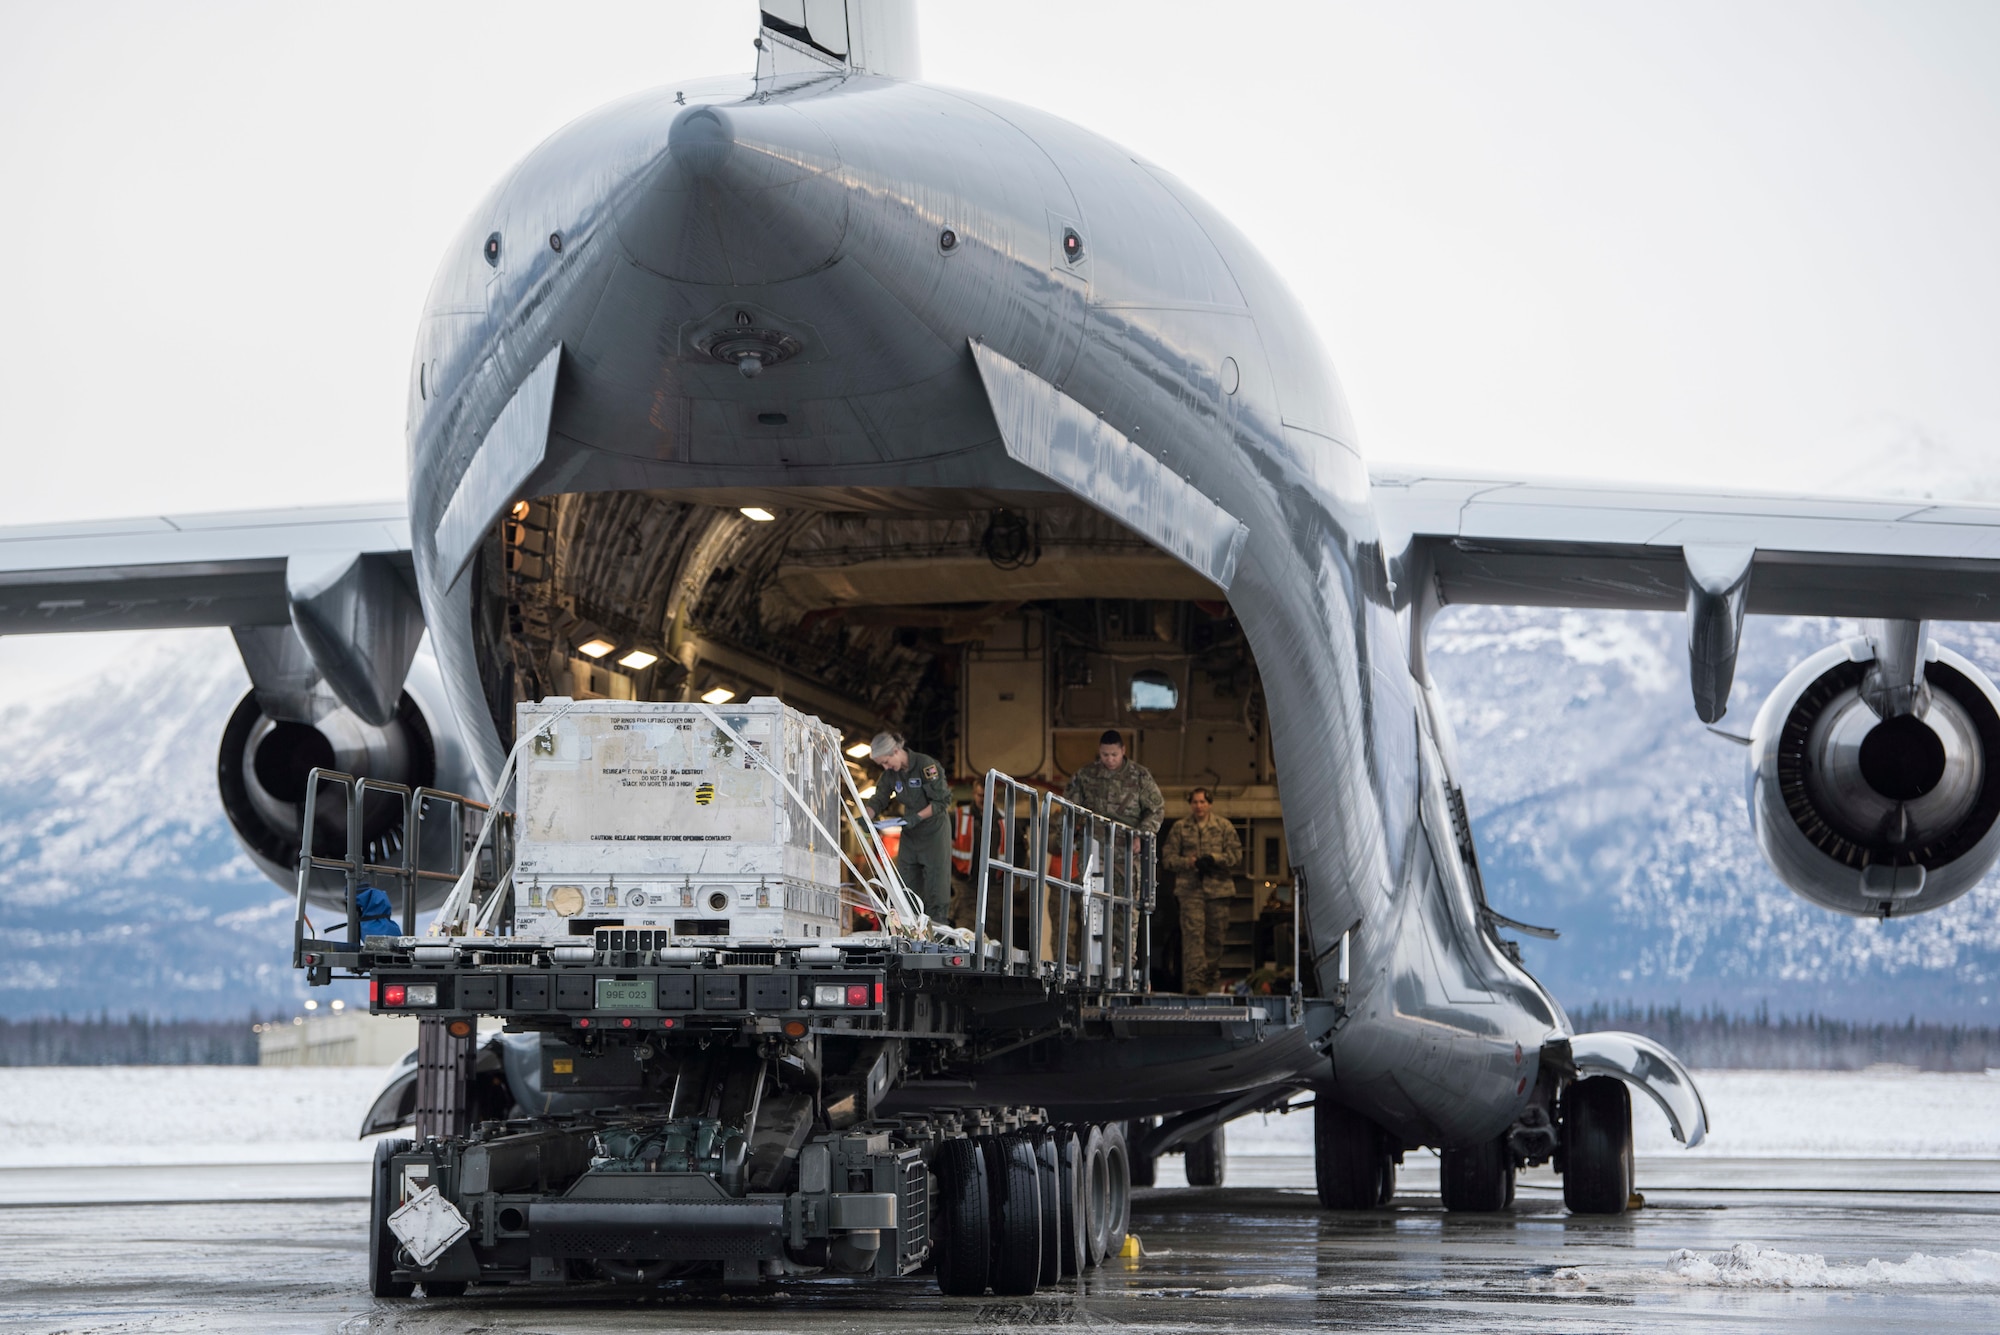 U.S. Air Force Airmen with the 732nd Aircraft Mobility Squadron unload cargo onto a C-17 Globemaster III at Joint Base Elmendorf-Richardson, Alaska, Dec. 1, 2018. JBER mission operations continue following a 7.0 earthquake hit to Anchorage, Alaska, on Nov. 30.